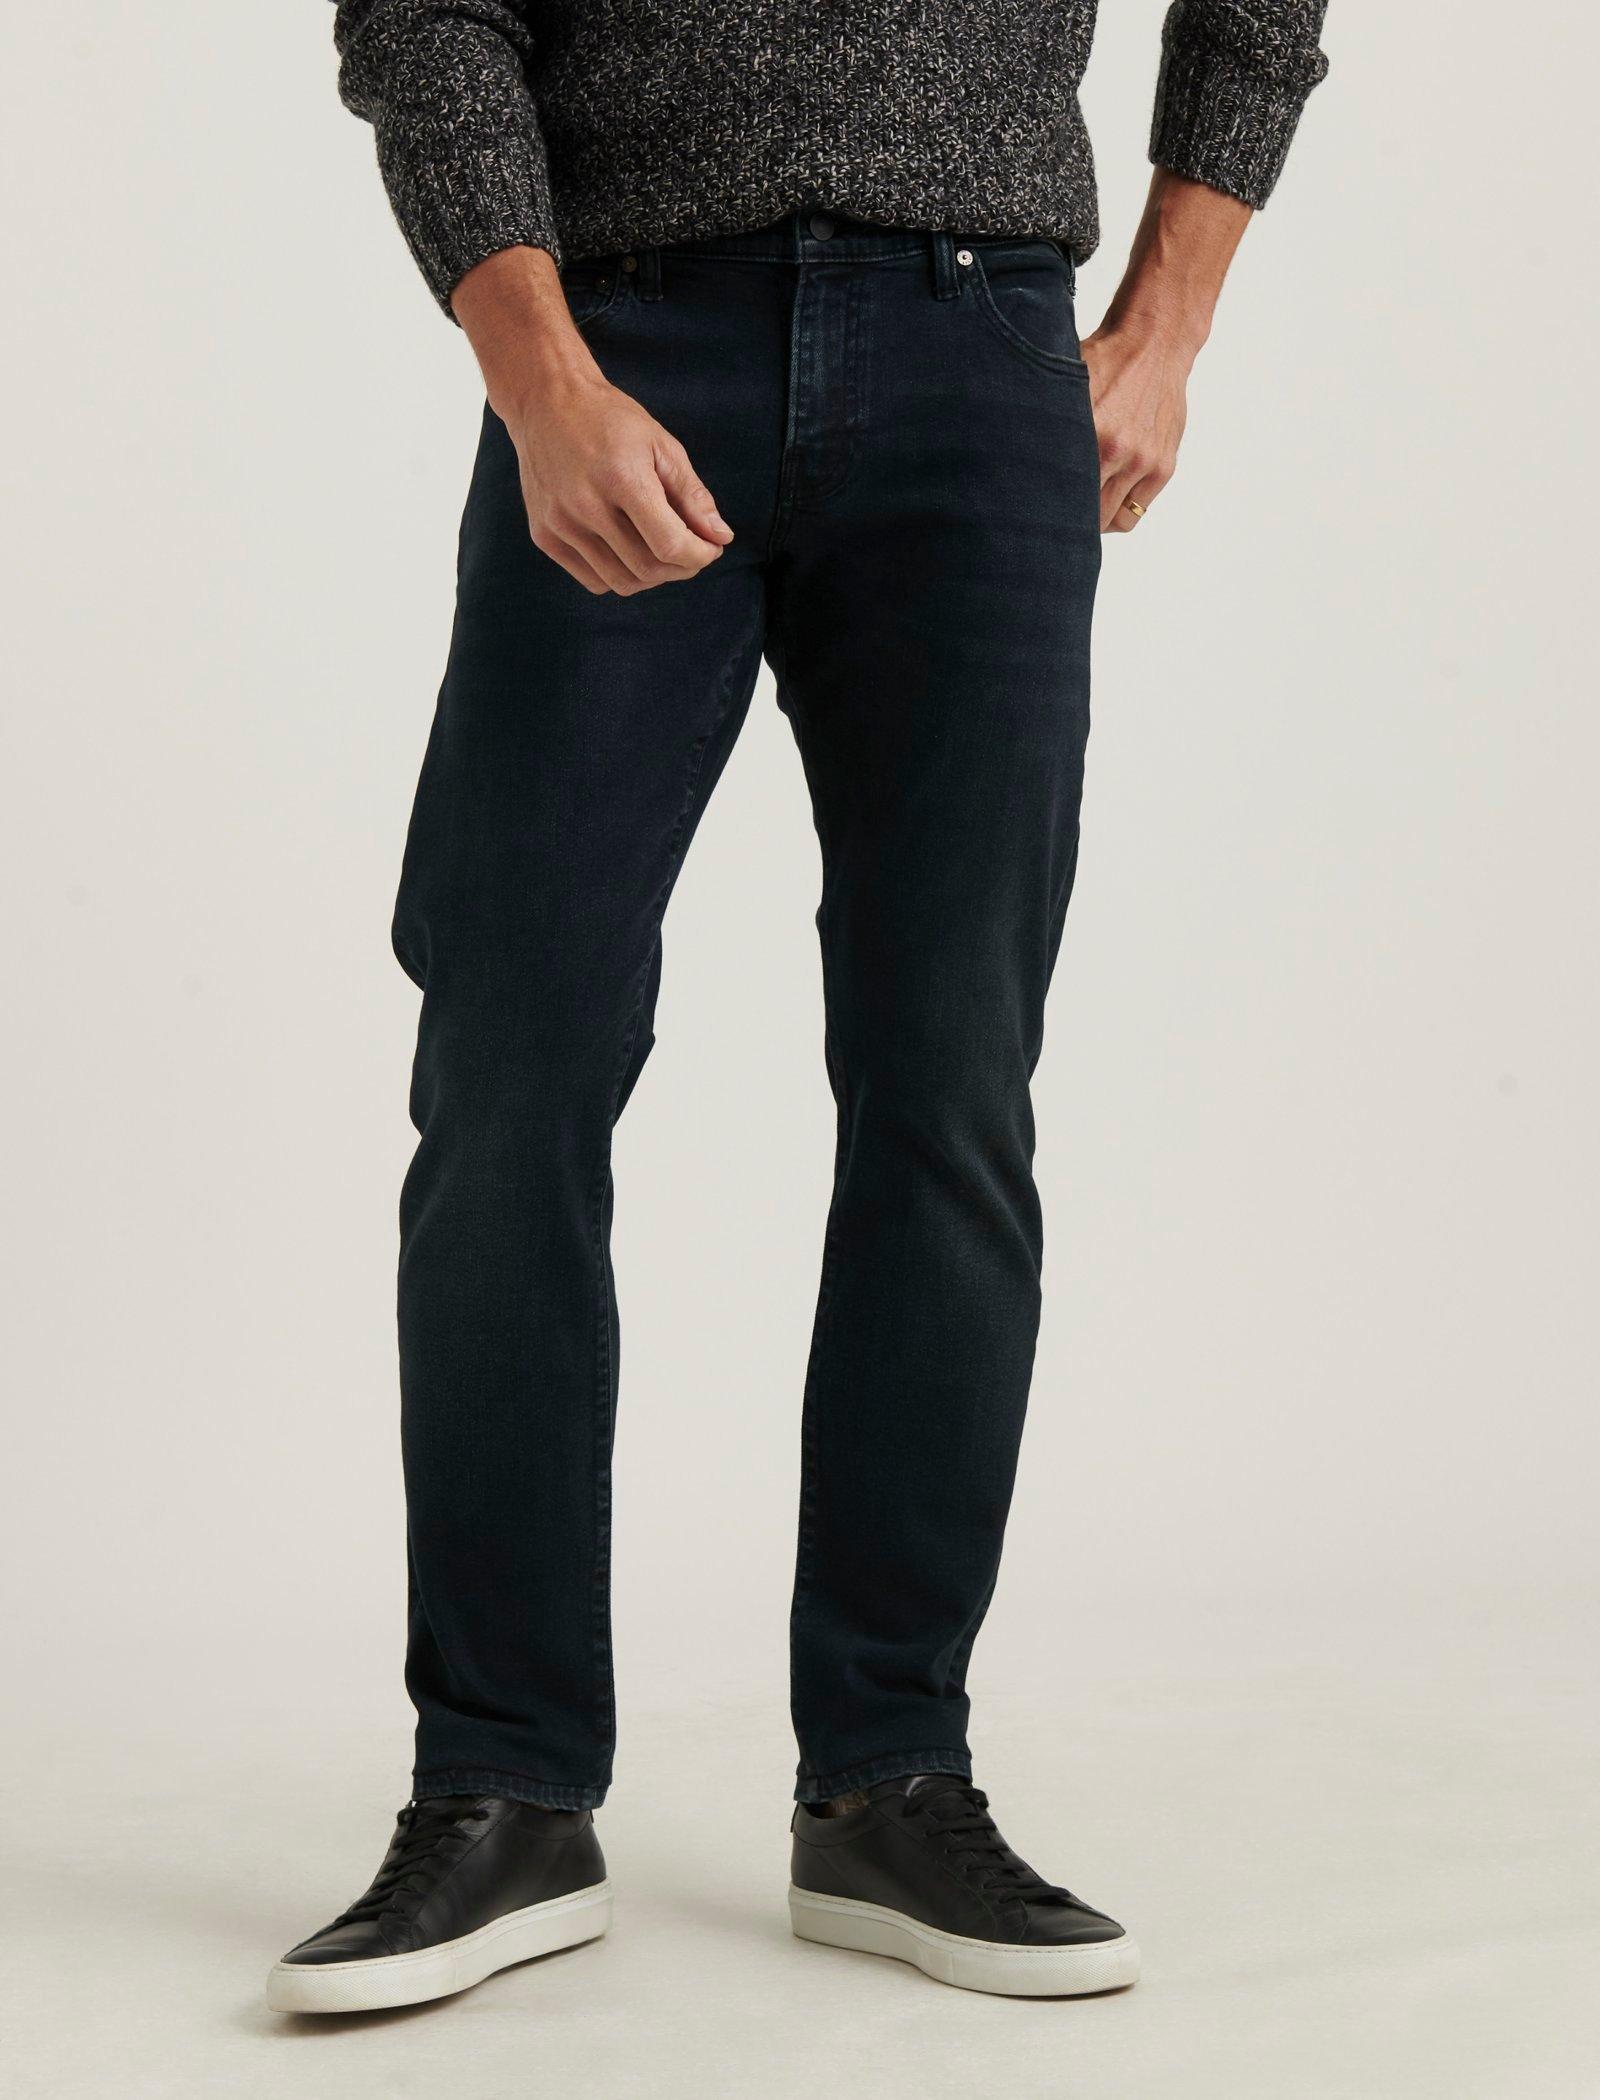 lucky jeans sale mens